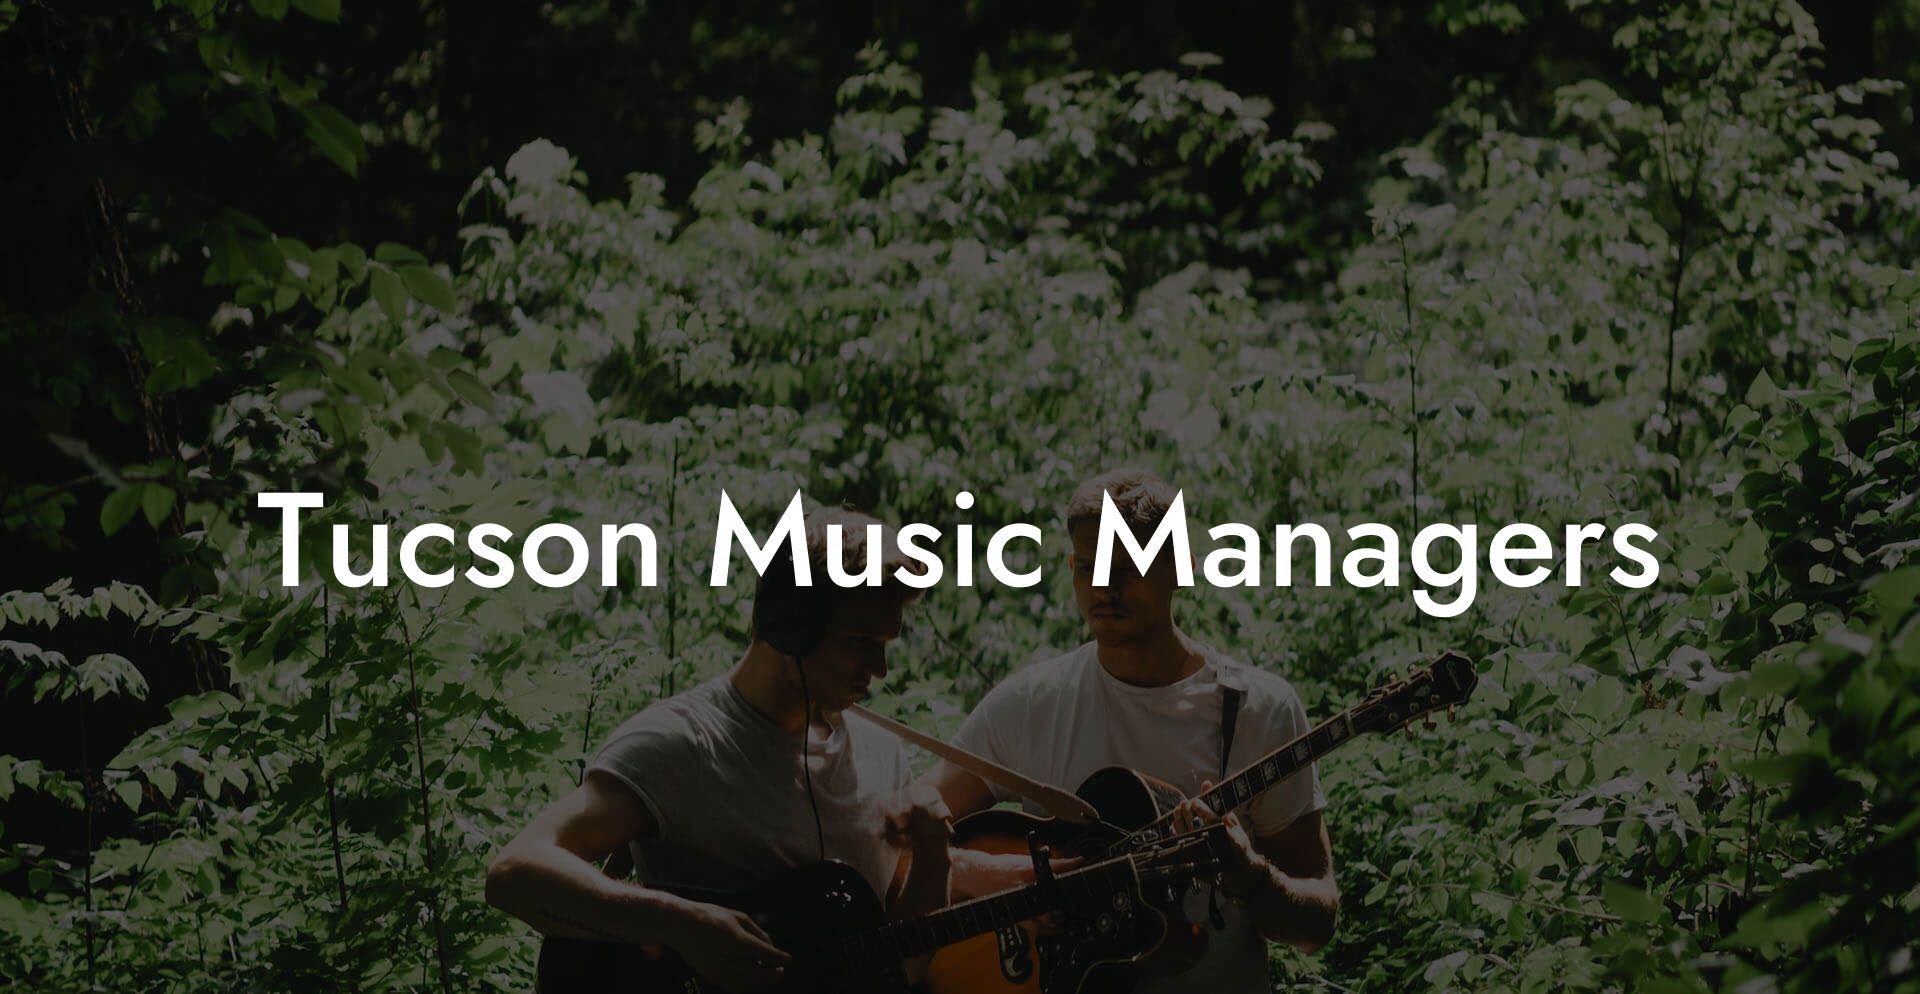 Tucson Music Managers